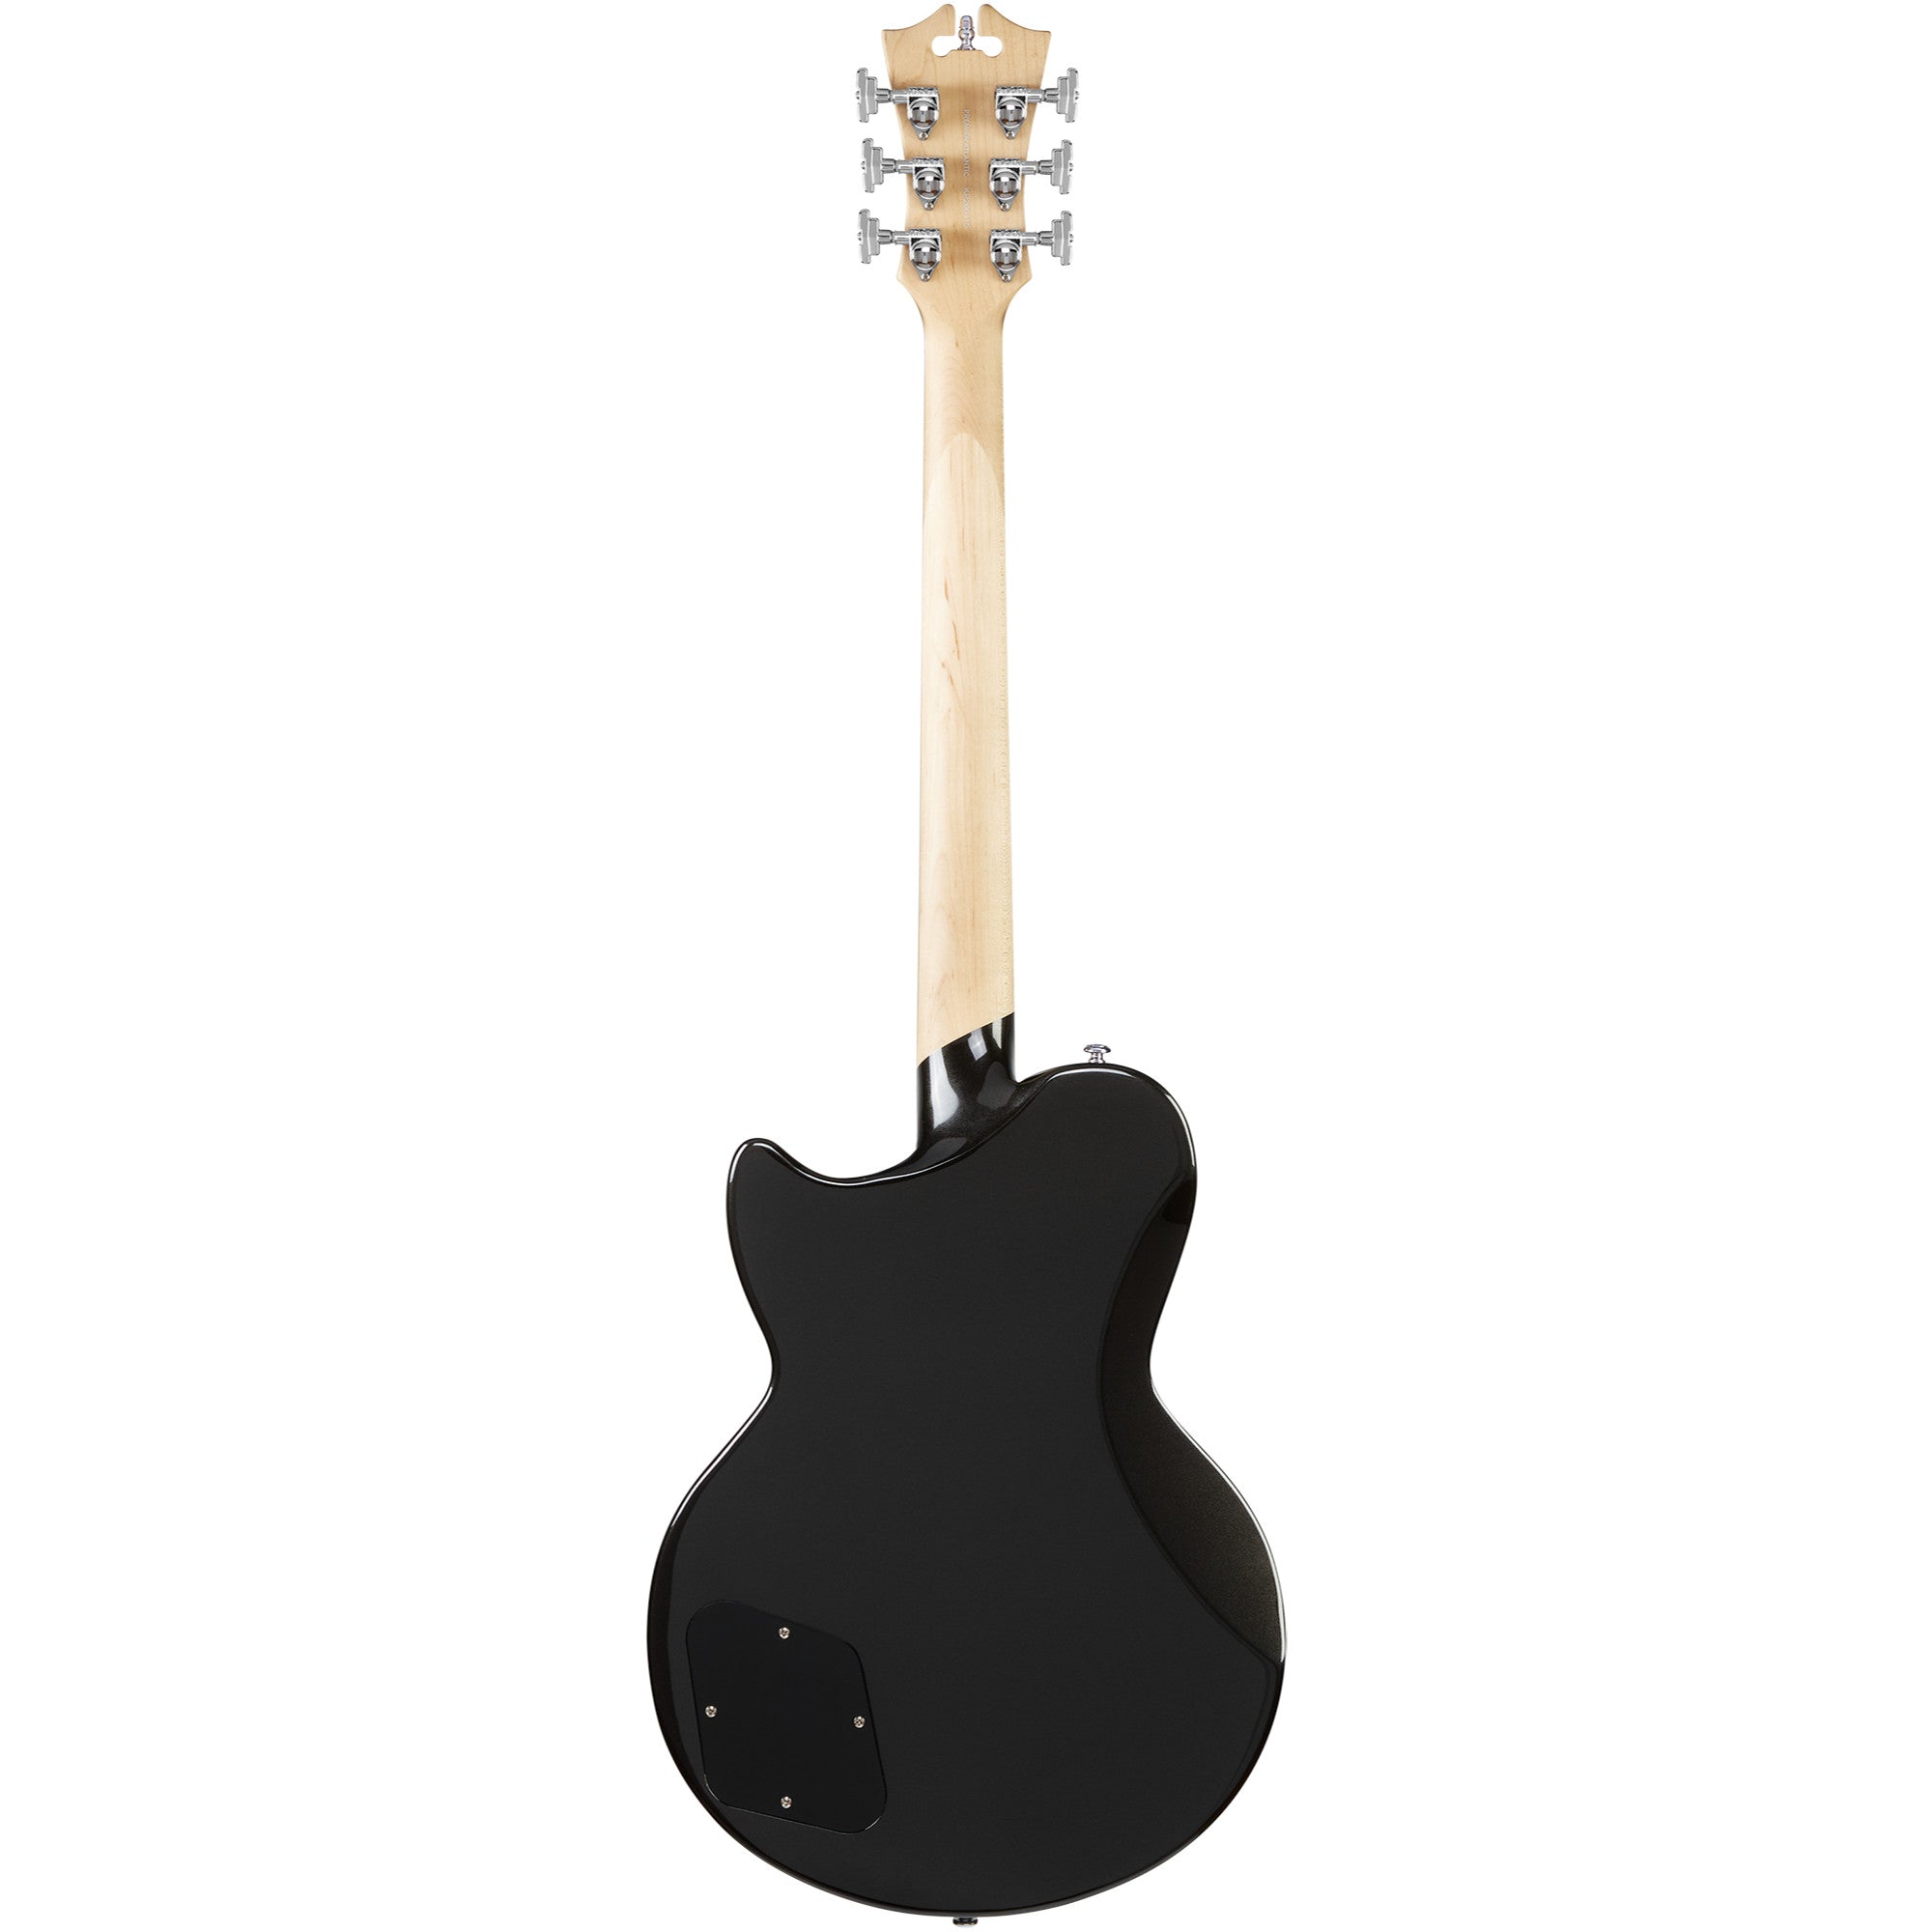 D'Angelico, D’Angelico Premier Atlantic Electric Guitar with Stopbar Tailpiece, Black Flake